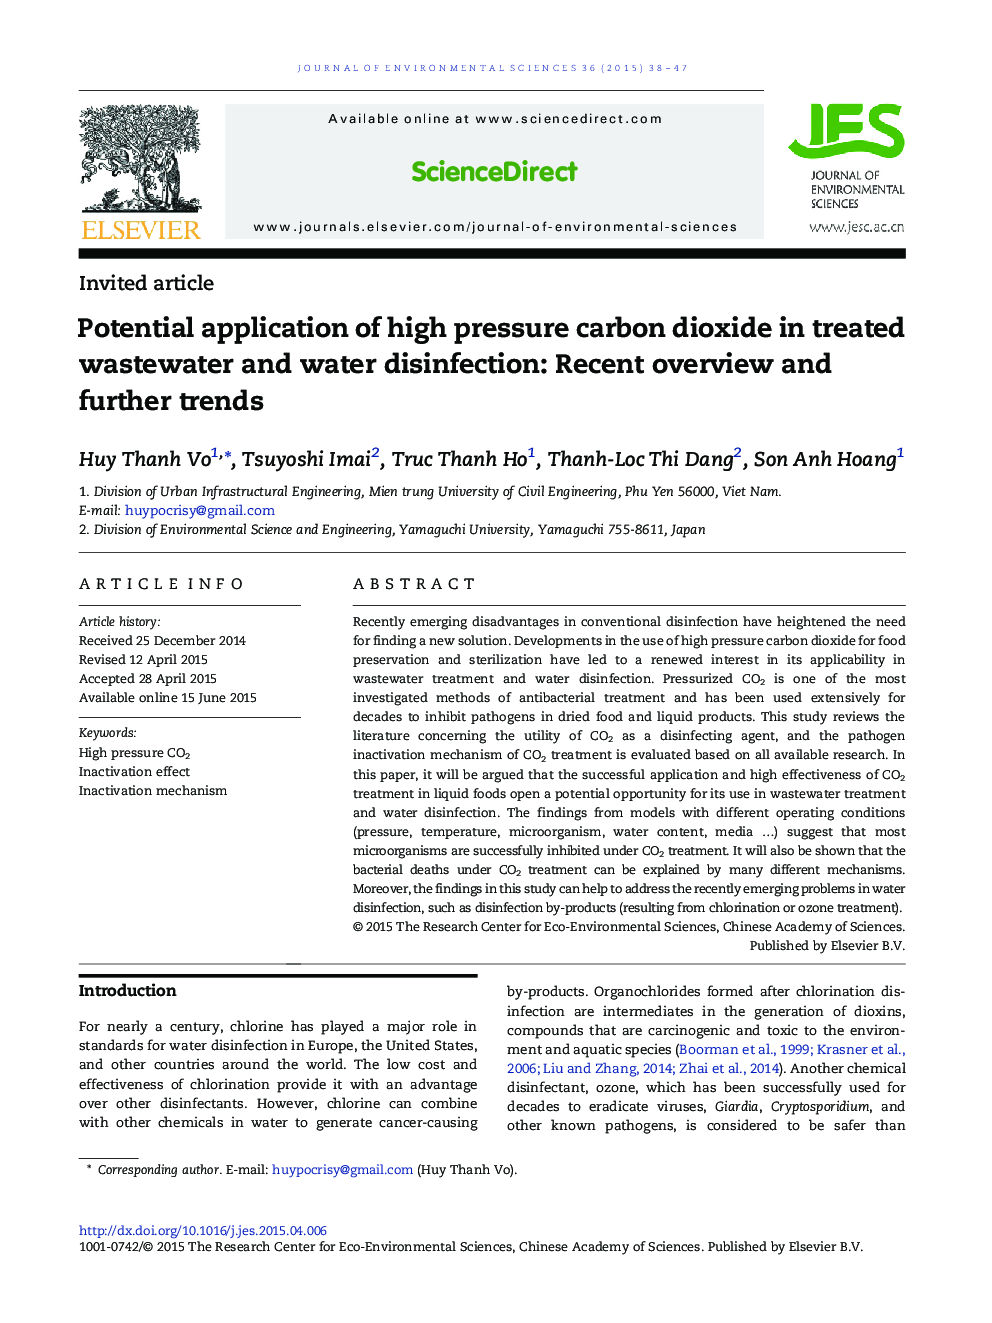 Potential application of high pressure carbon dioxide in treated wastewater and water disinfection: Recent overview and further trends